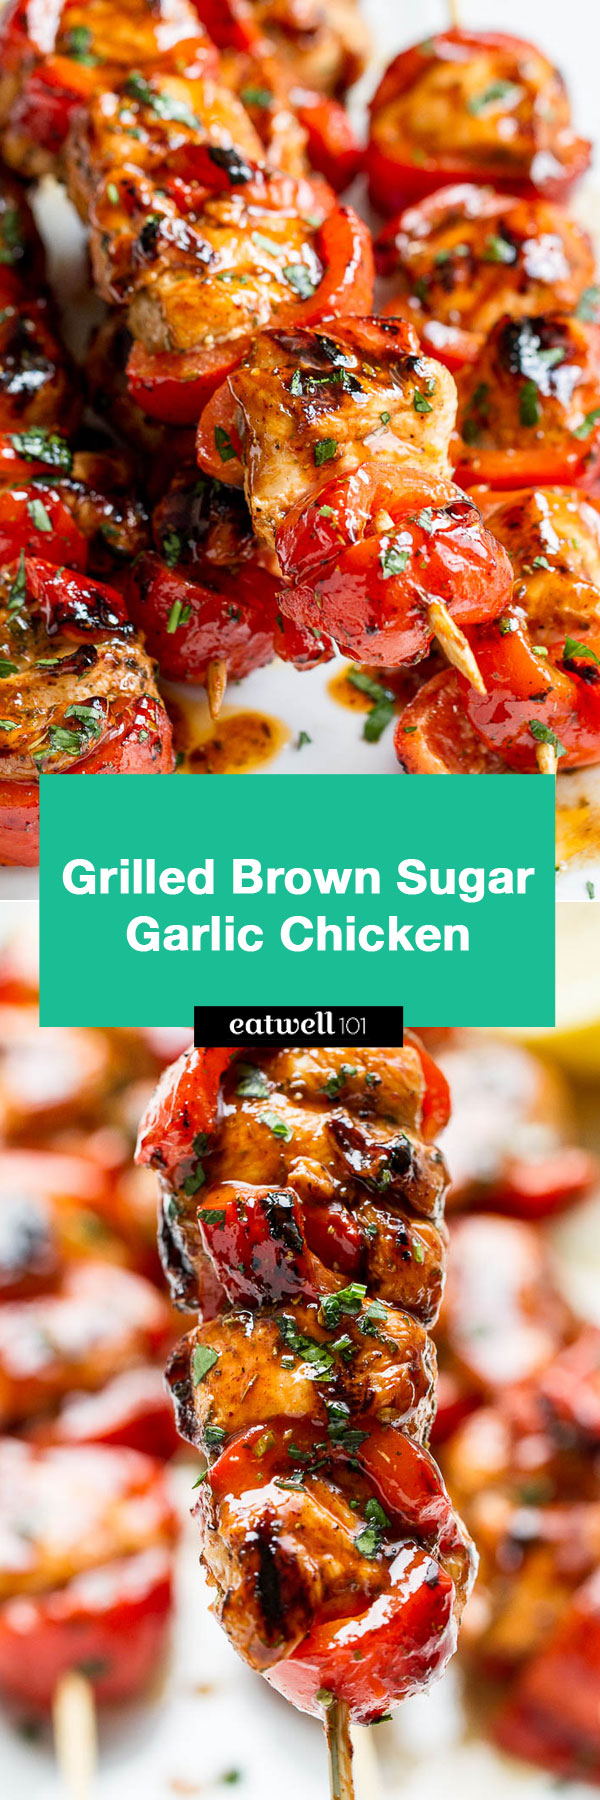 Grilled Brown Sugar Garlic Chicken - Juicy tender and so delicious! Ideal for a quick dinner any night of the week.